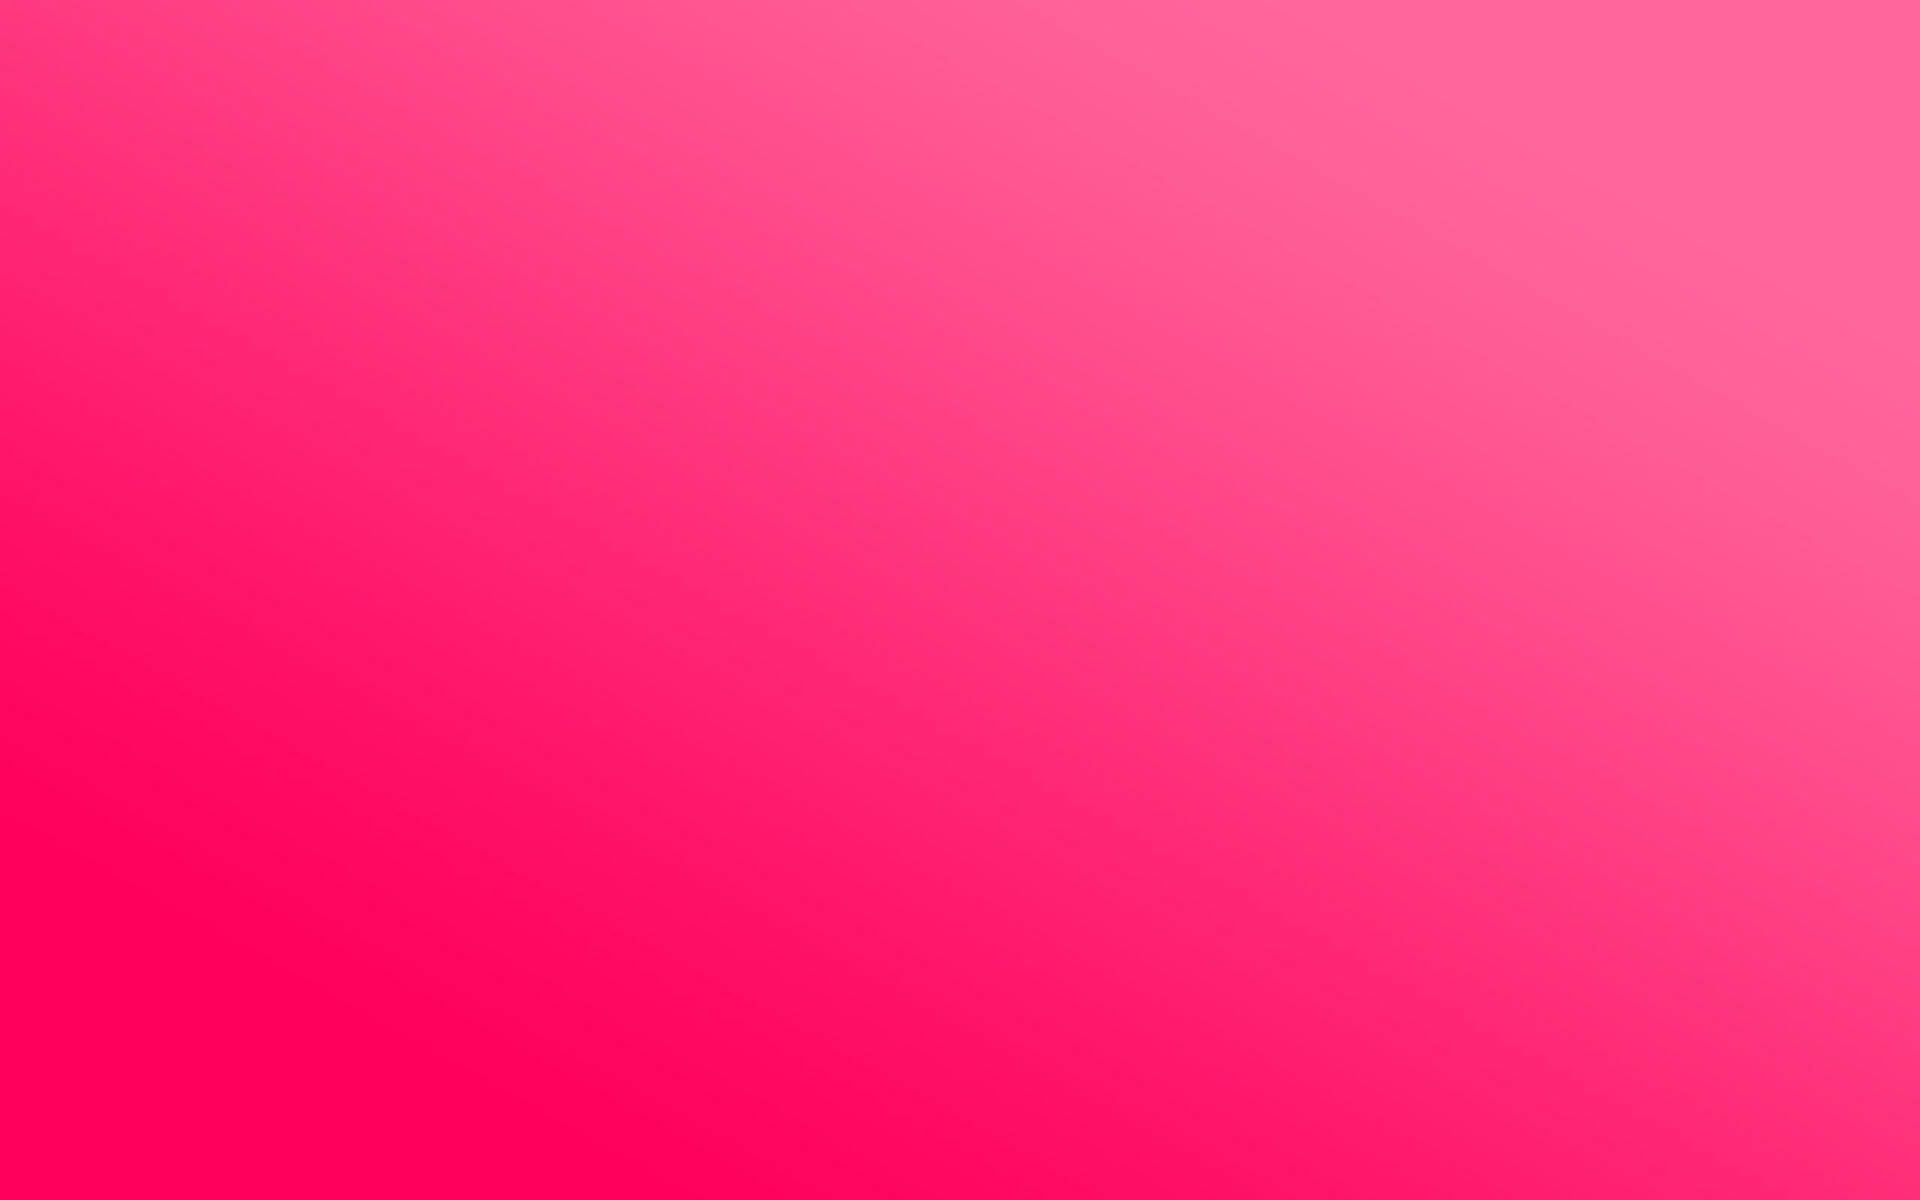 Red And Neon Pink Gradient Wallpaper